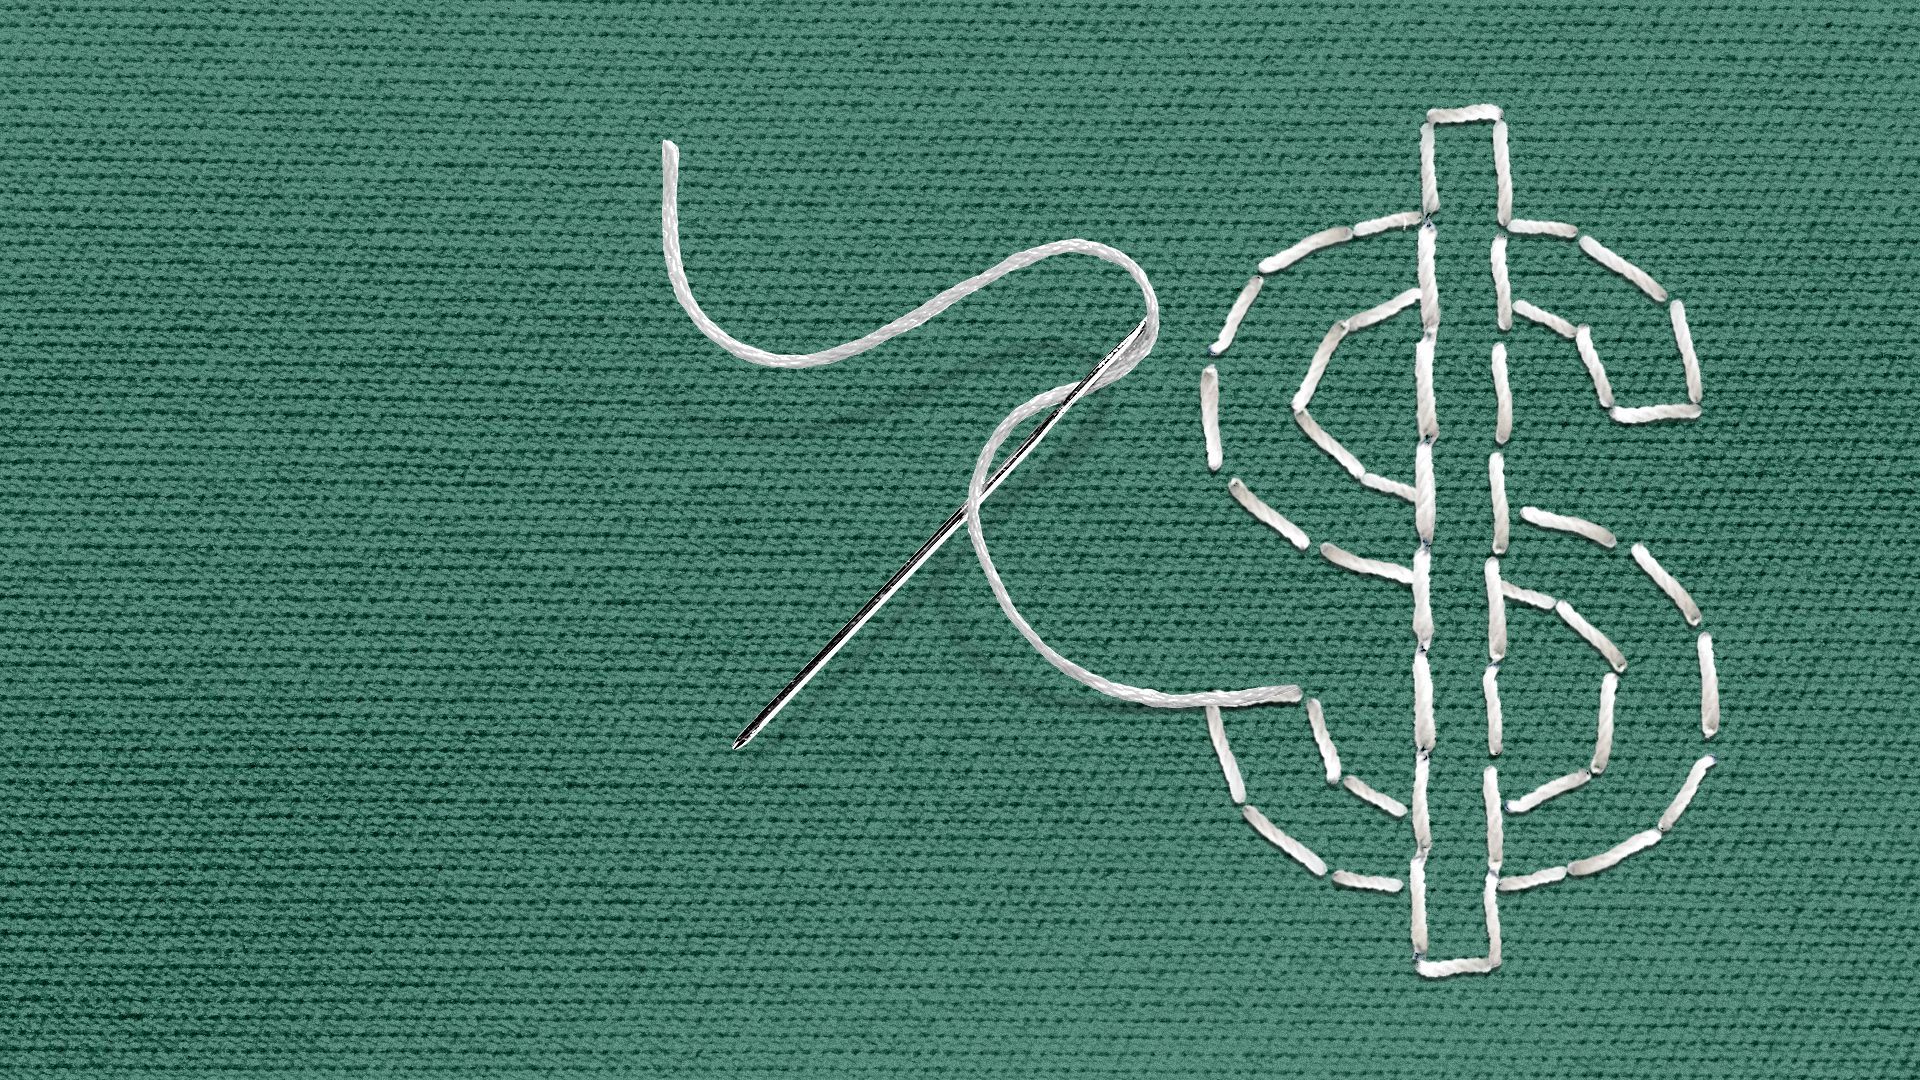 Illustration of a dollar sign being sewn into a piece of fabric with a needle and thread.